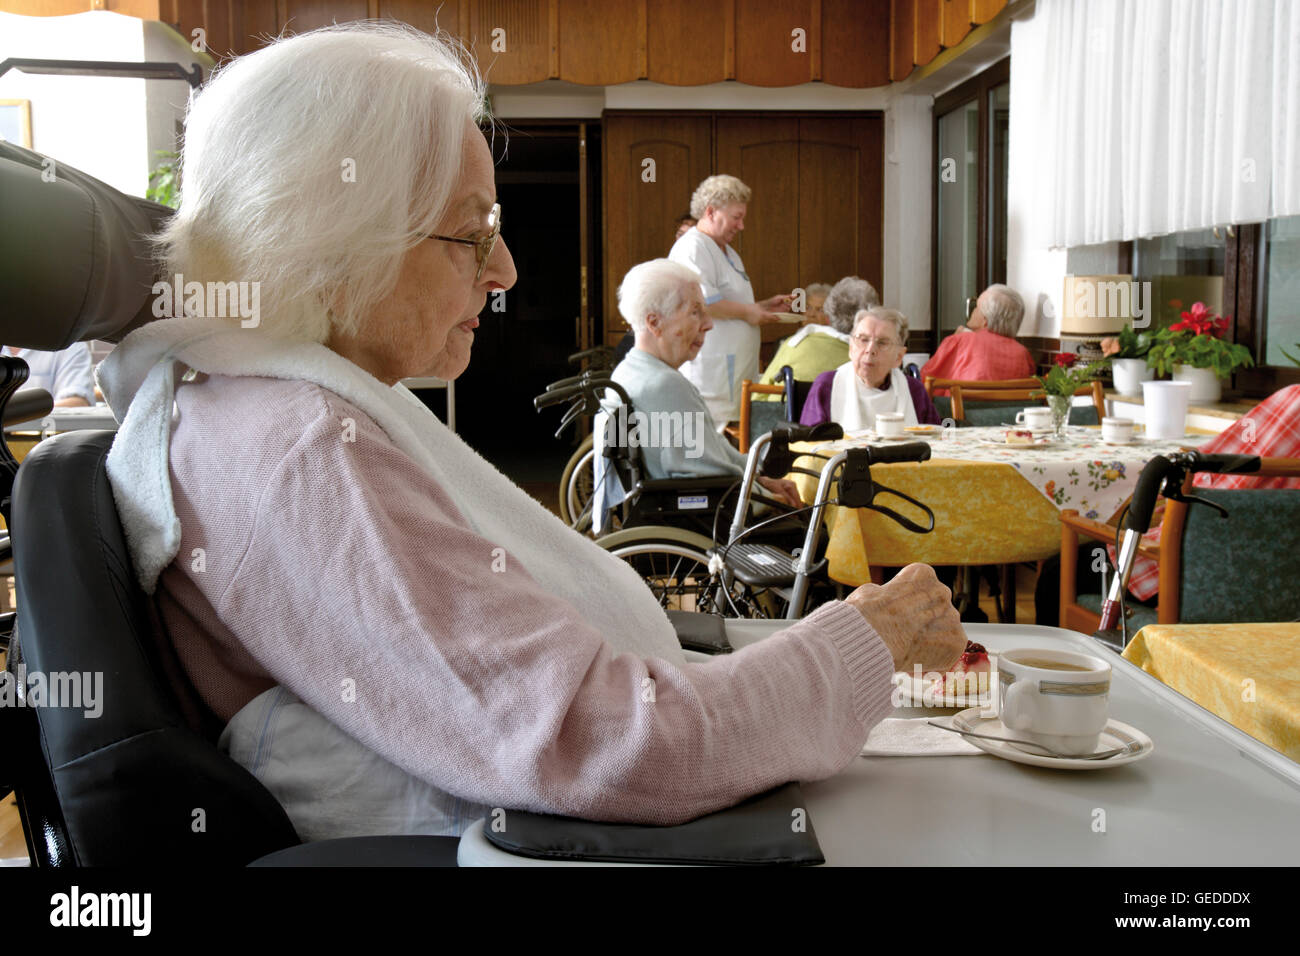 Residents sitting in the dining hall drinking coffee at a nursing home Stock Photo